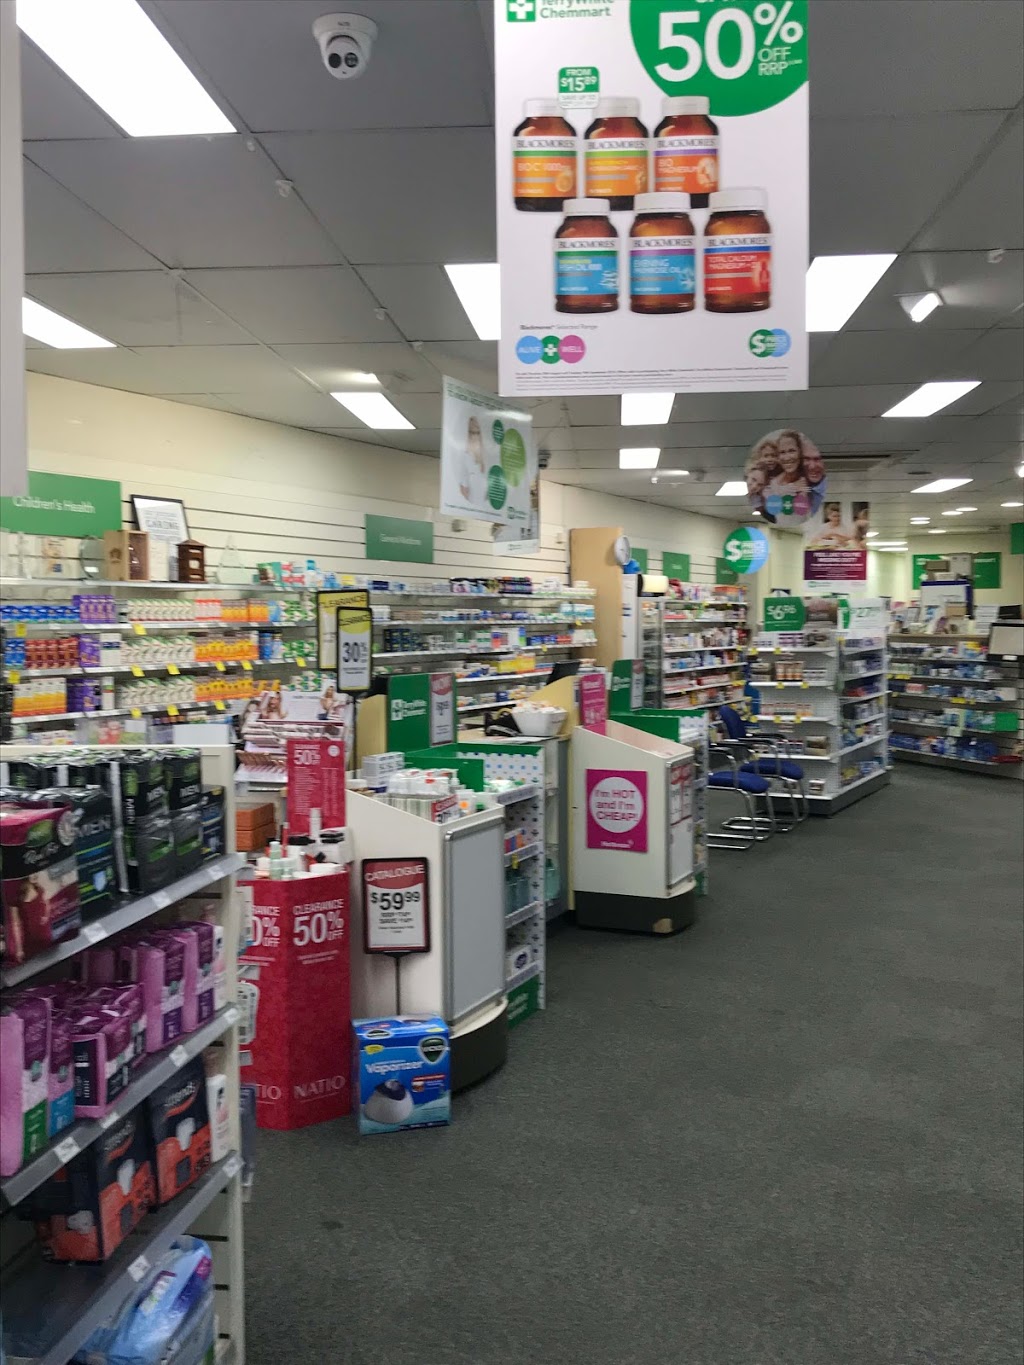 Tim Siv’s TerryWhite Chemmart Compounding Pharmacy Clare | pharmacy | 261 Main N Rd, Clare SA 5453, Australia | 0888422195 OR +61 8 8842 2195